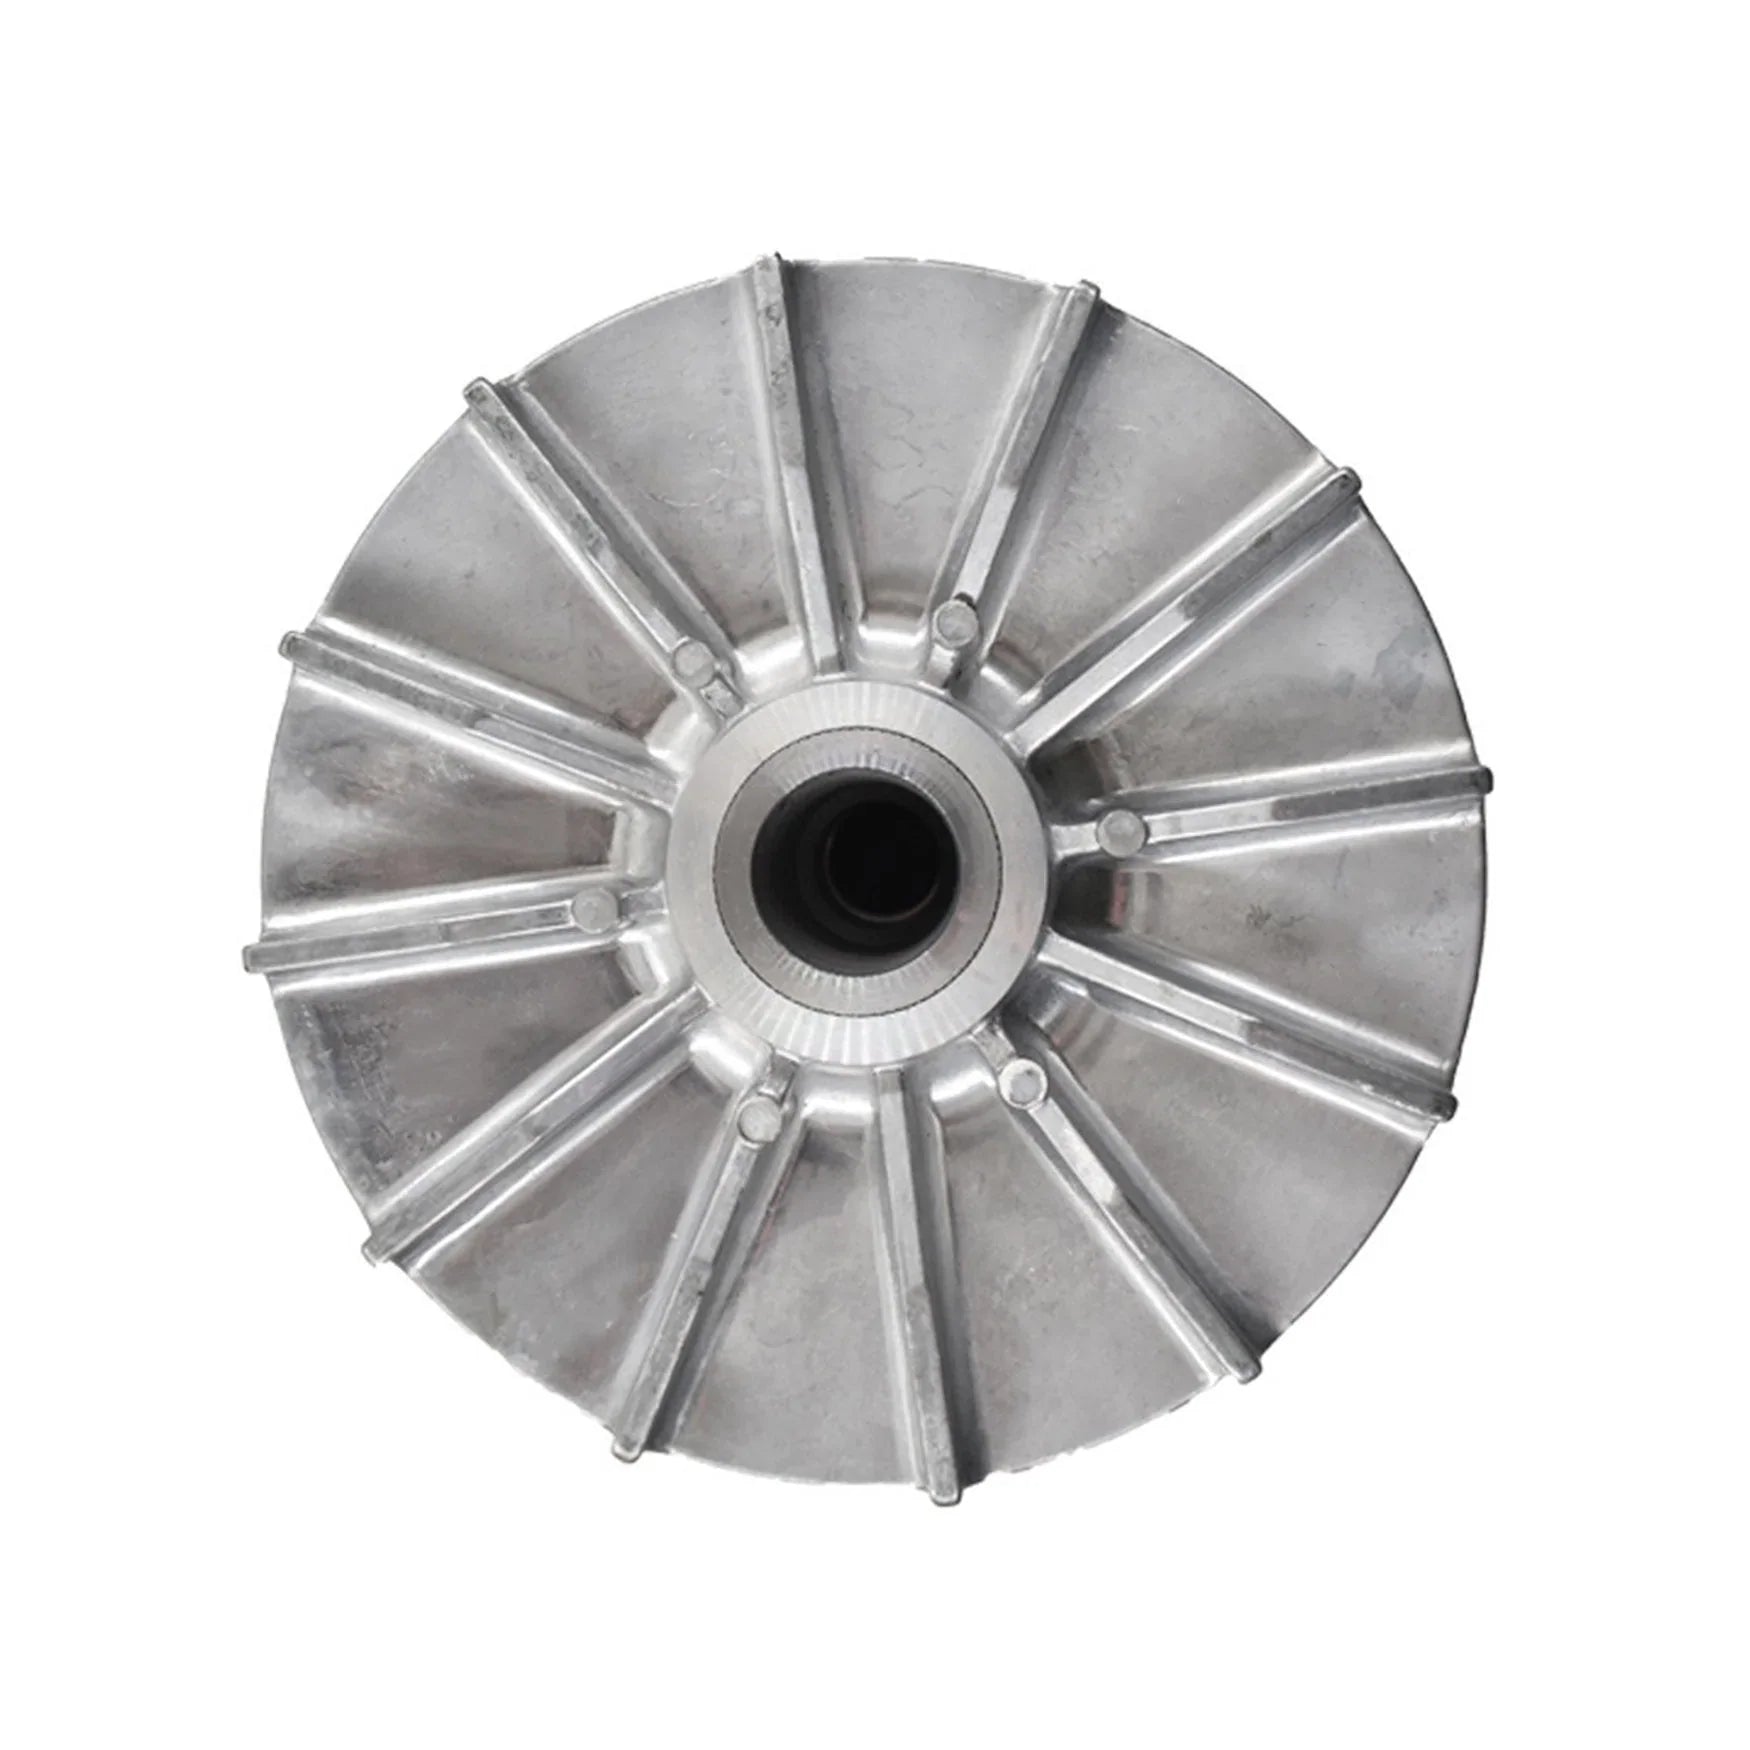 Primary Drive Clutch Fits For 10-14 Polaris Ranger 800 Shaft Size 29.5mm one-way LAB WORK MOTO